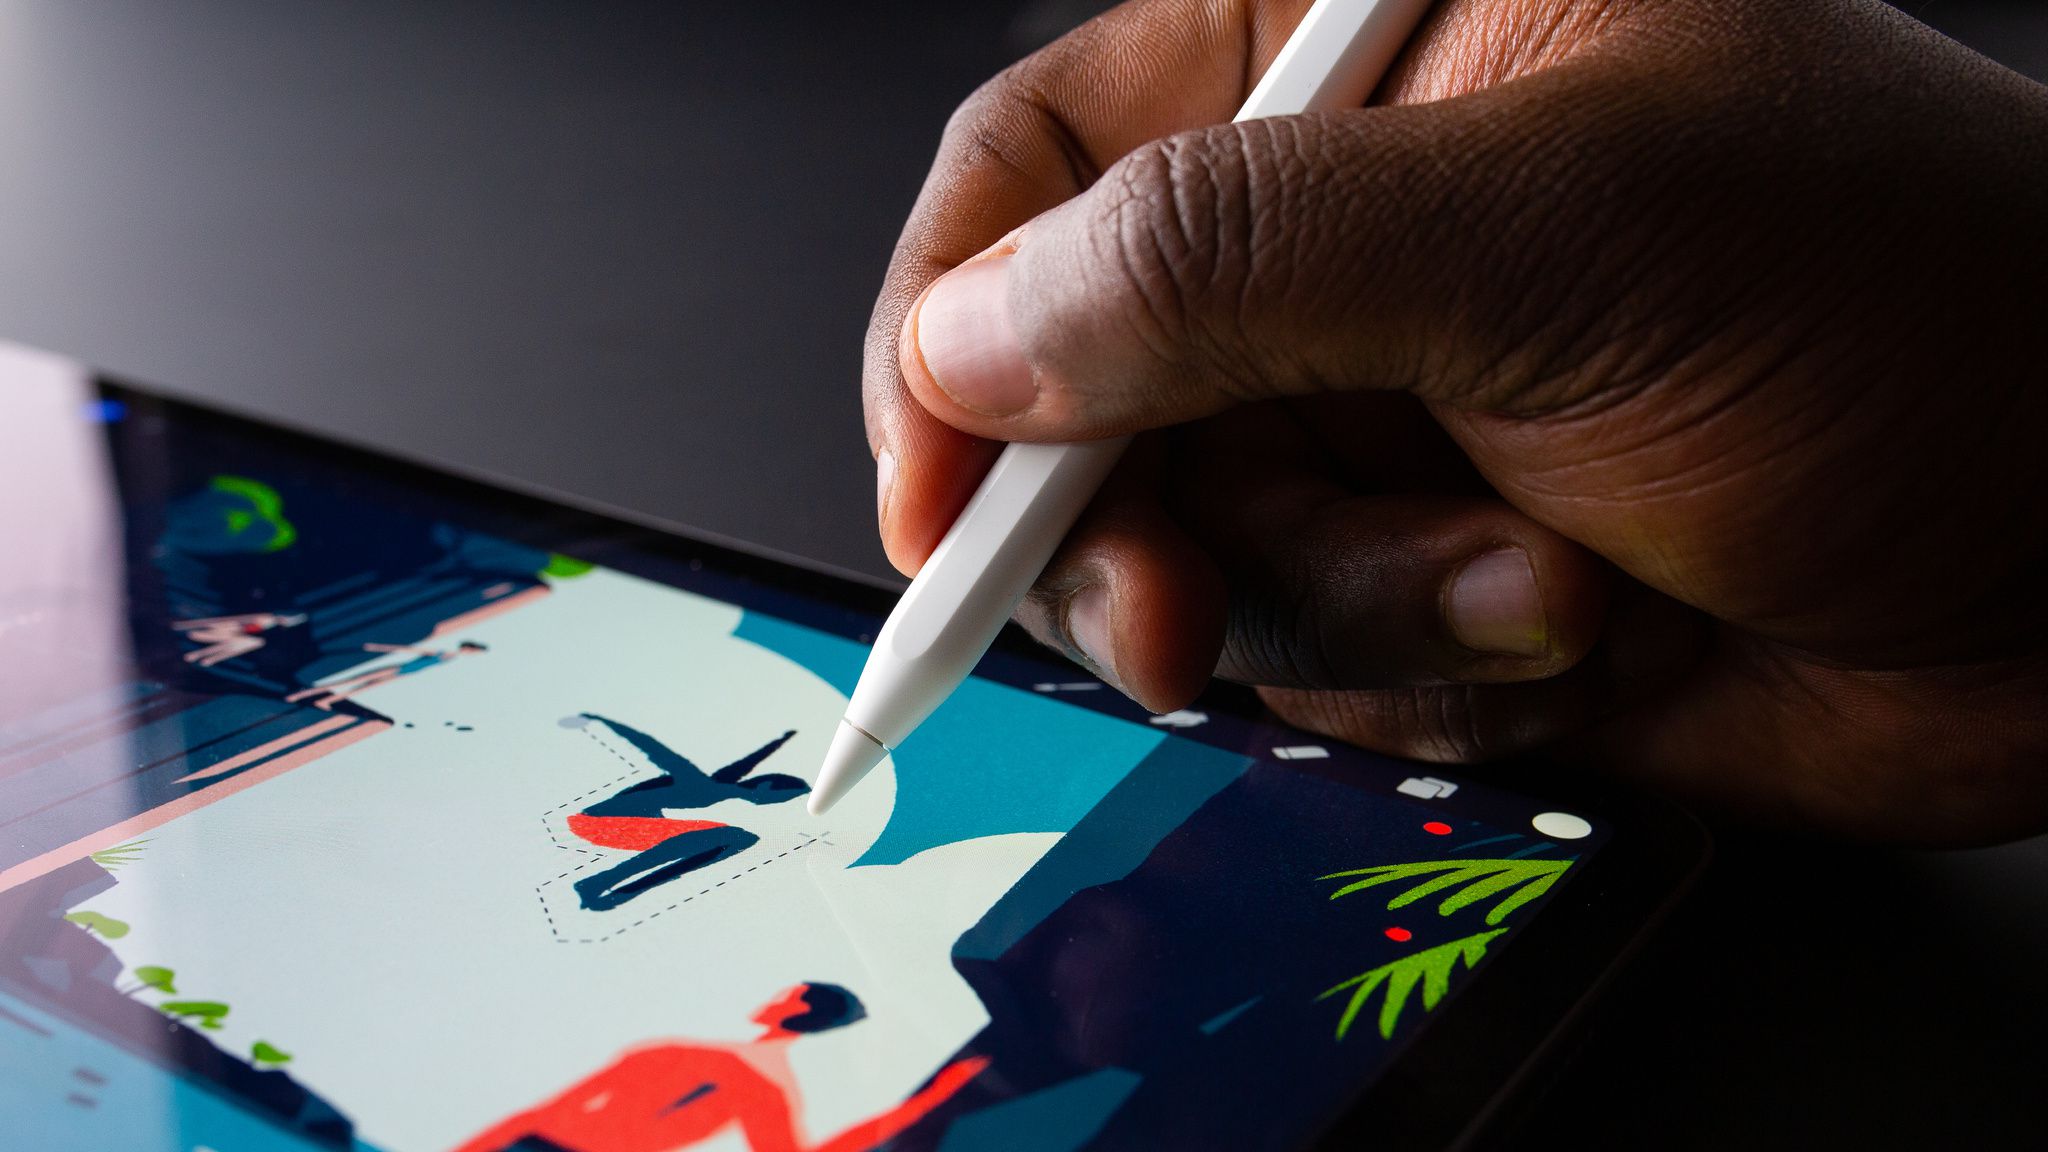 New Apple Pencil Rumored to Launch This Month - macrumors.com